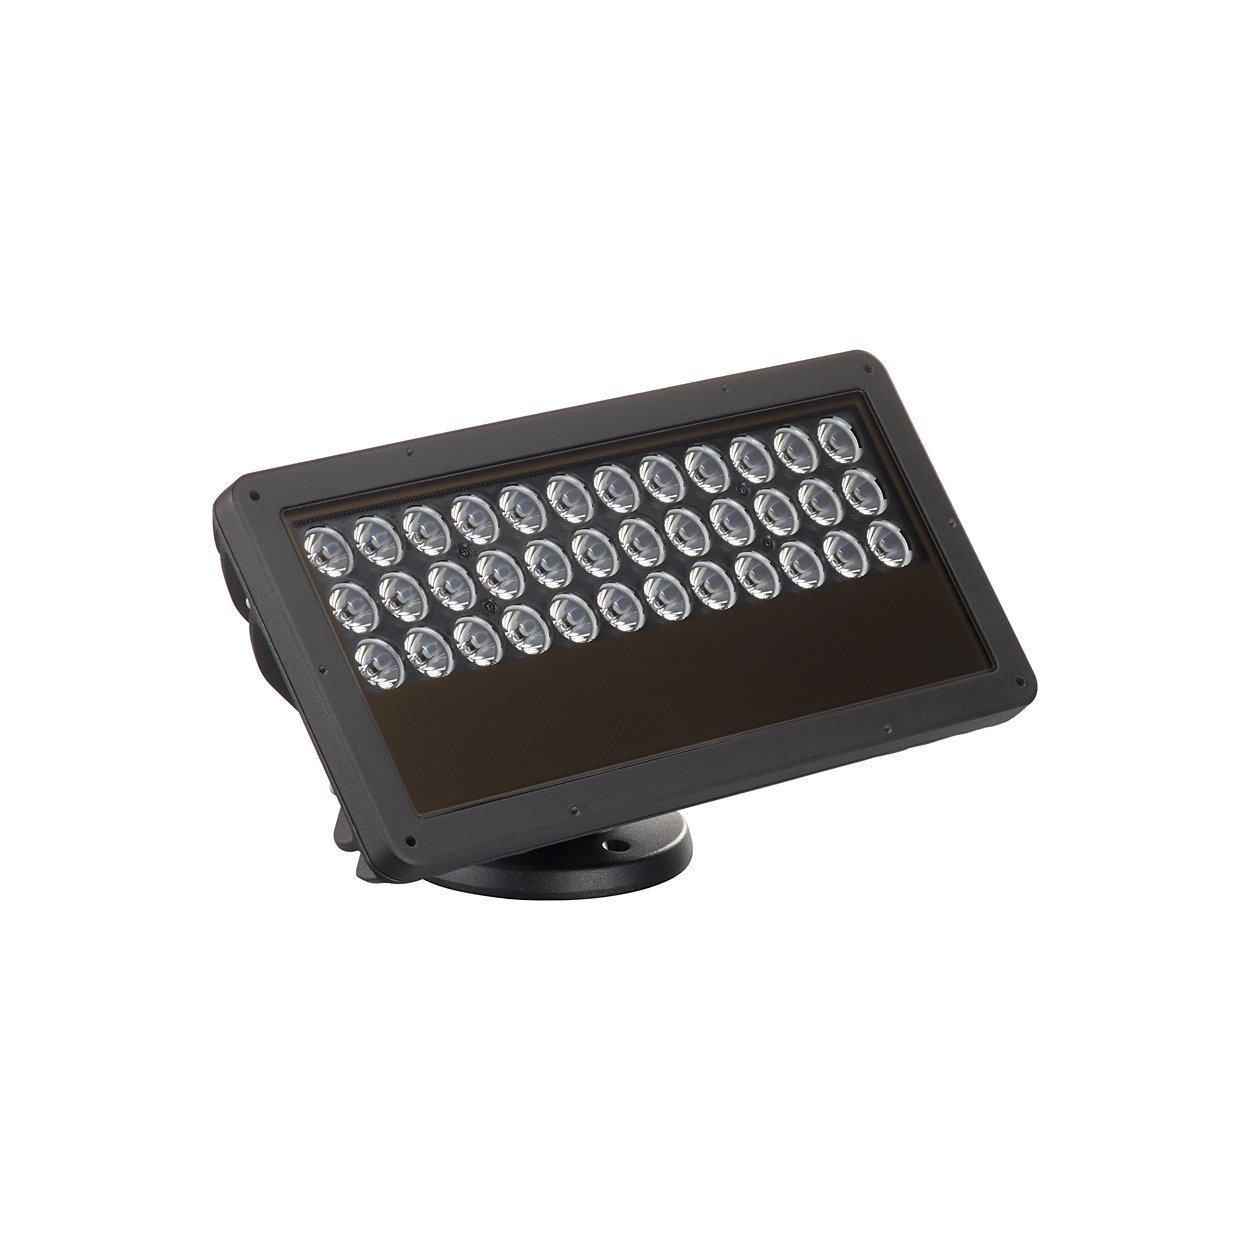 eColor Blast Powercore gen4 - Customizable exterior LED wash luminaire with solid color light